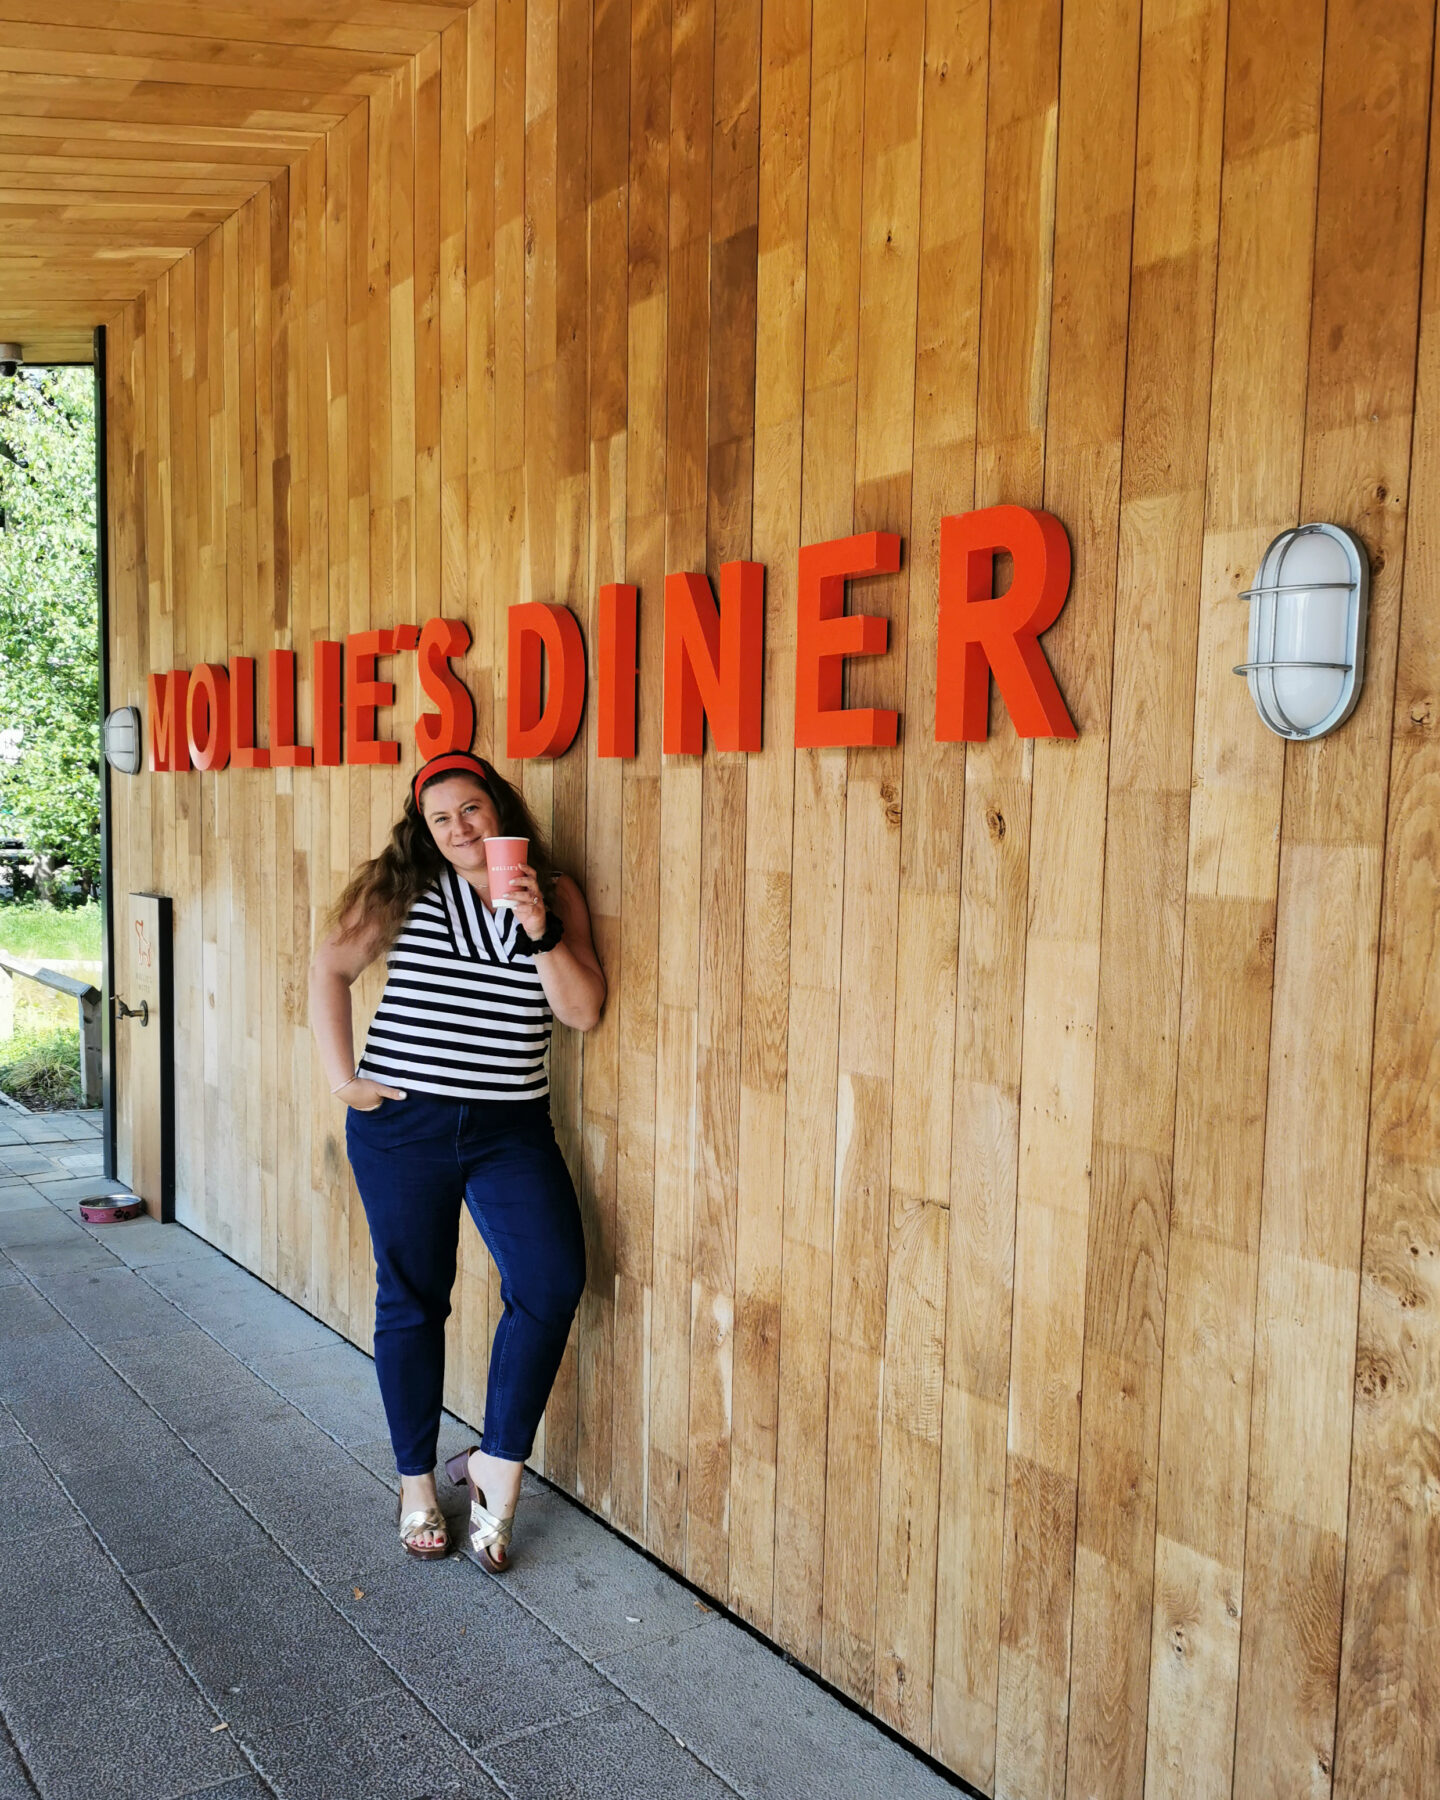 Mollie’s Motel & Diner Oxfordshire, Motel-Diner, Oxford, Oxfordshire, Family-Friendly, Hotel Review, the Frenchie Mummy, UK Staycation, Family Staycation